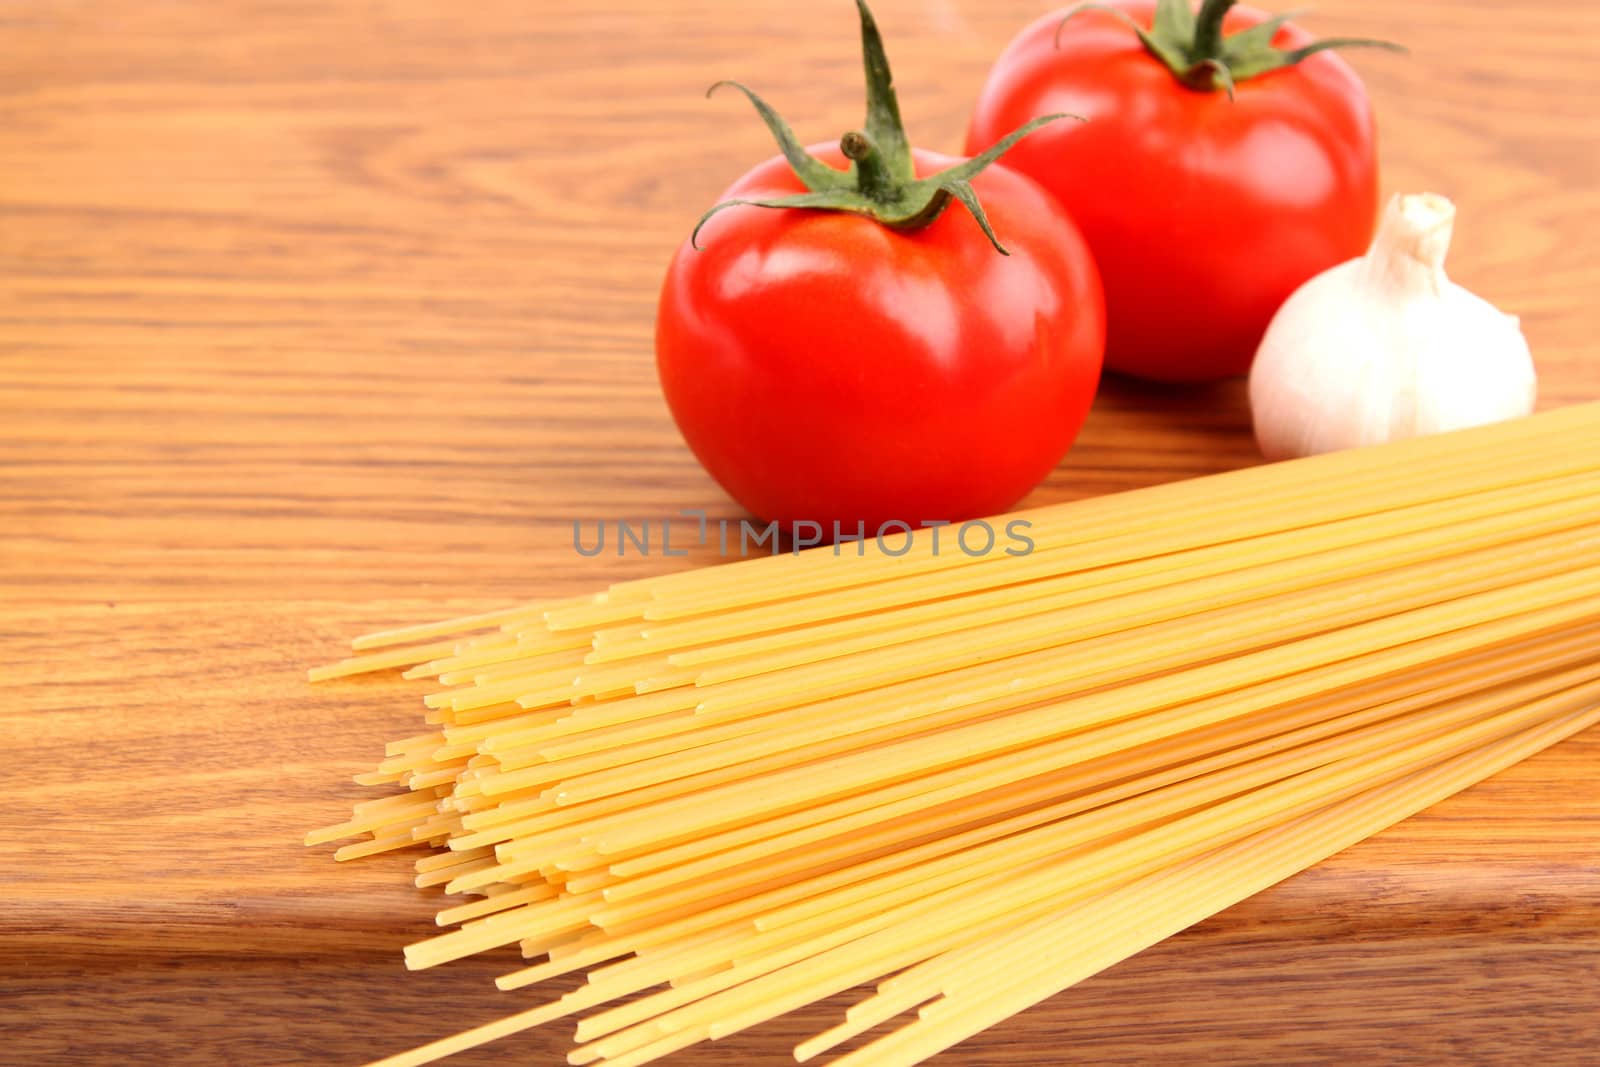 uncooked spaghetti, garlic and tomatos on a preparation board by indigolotos